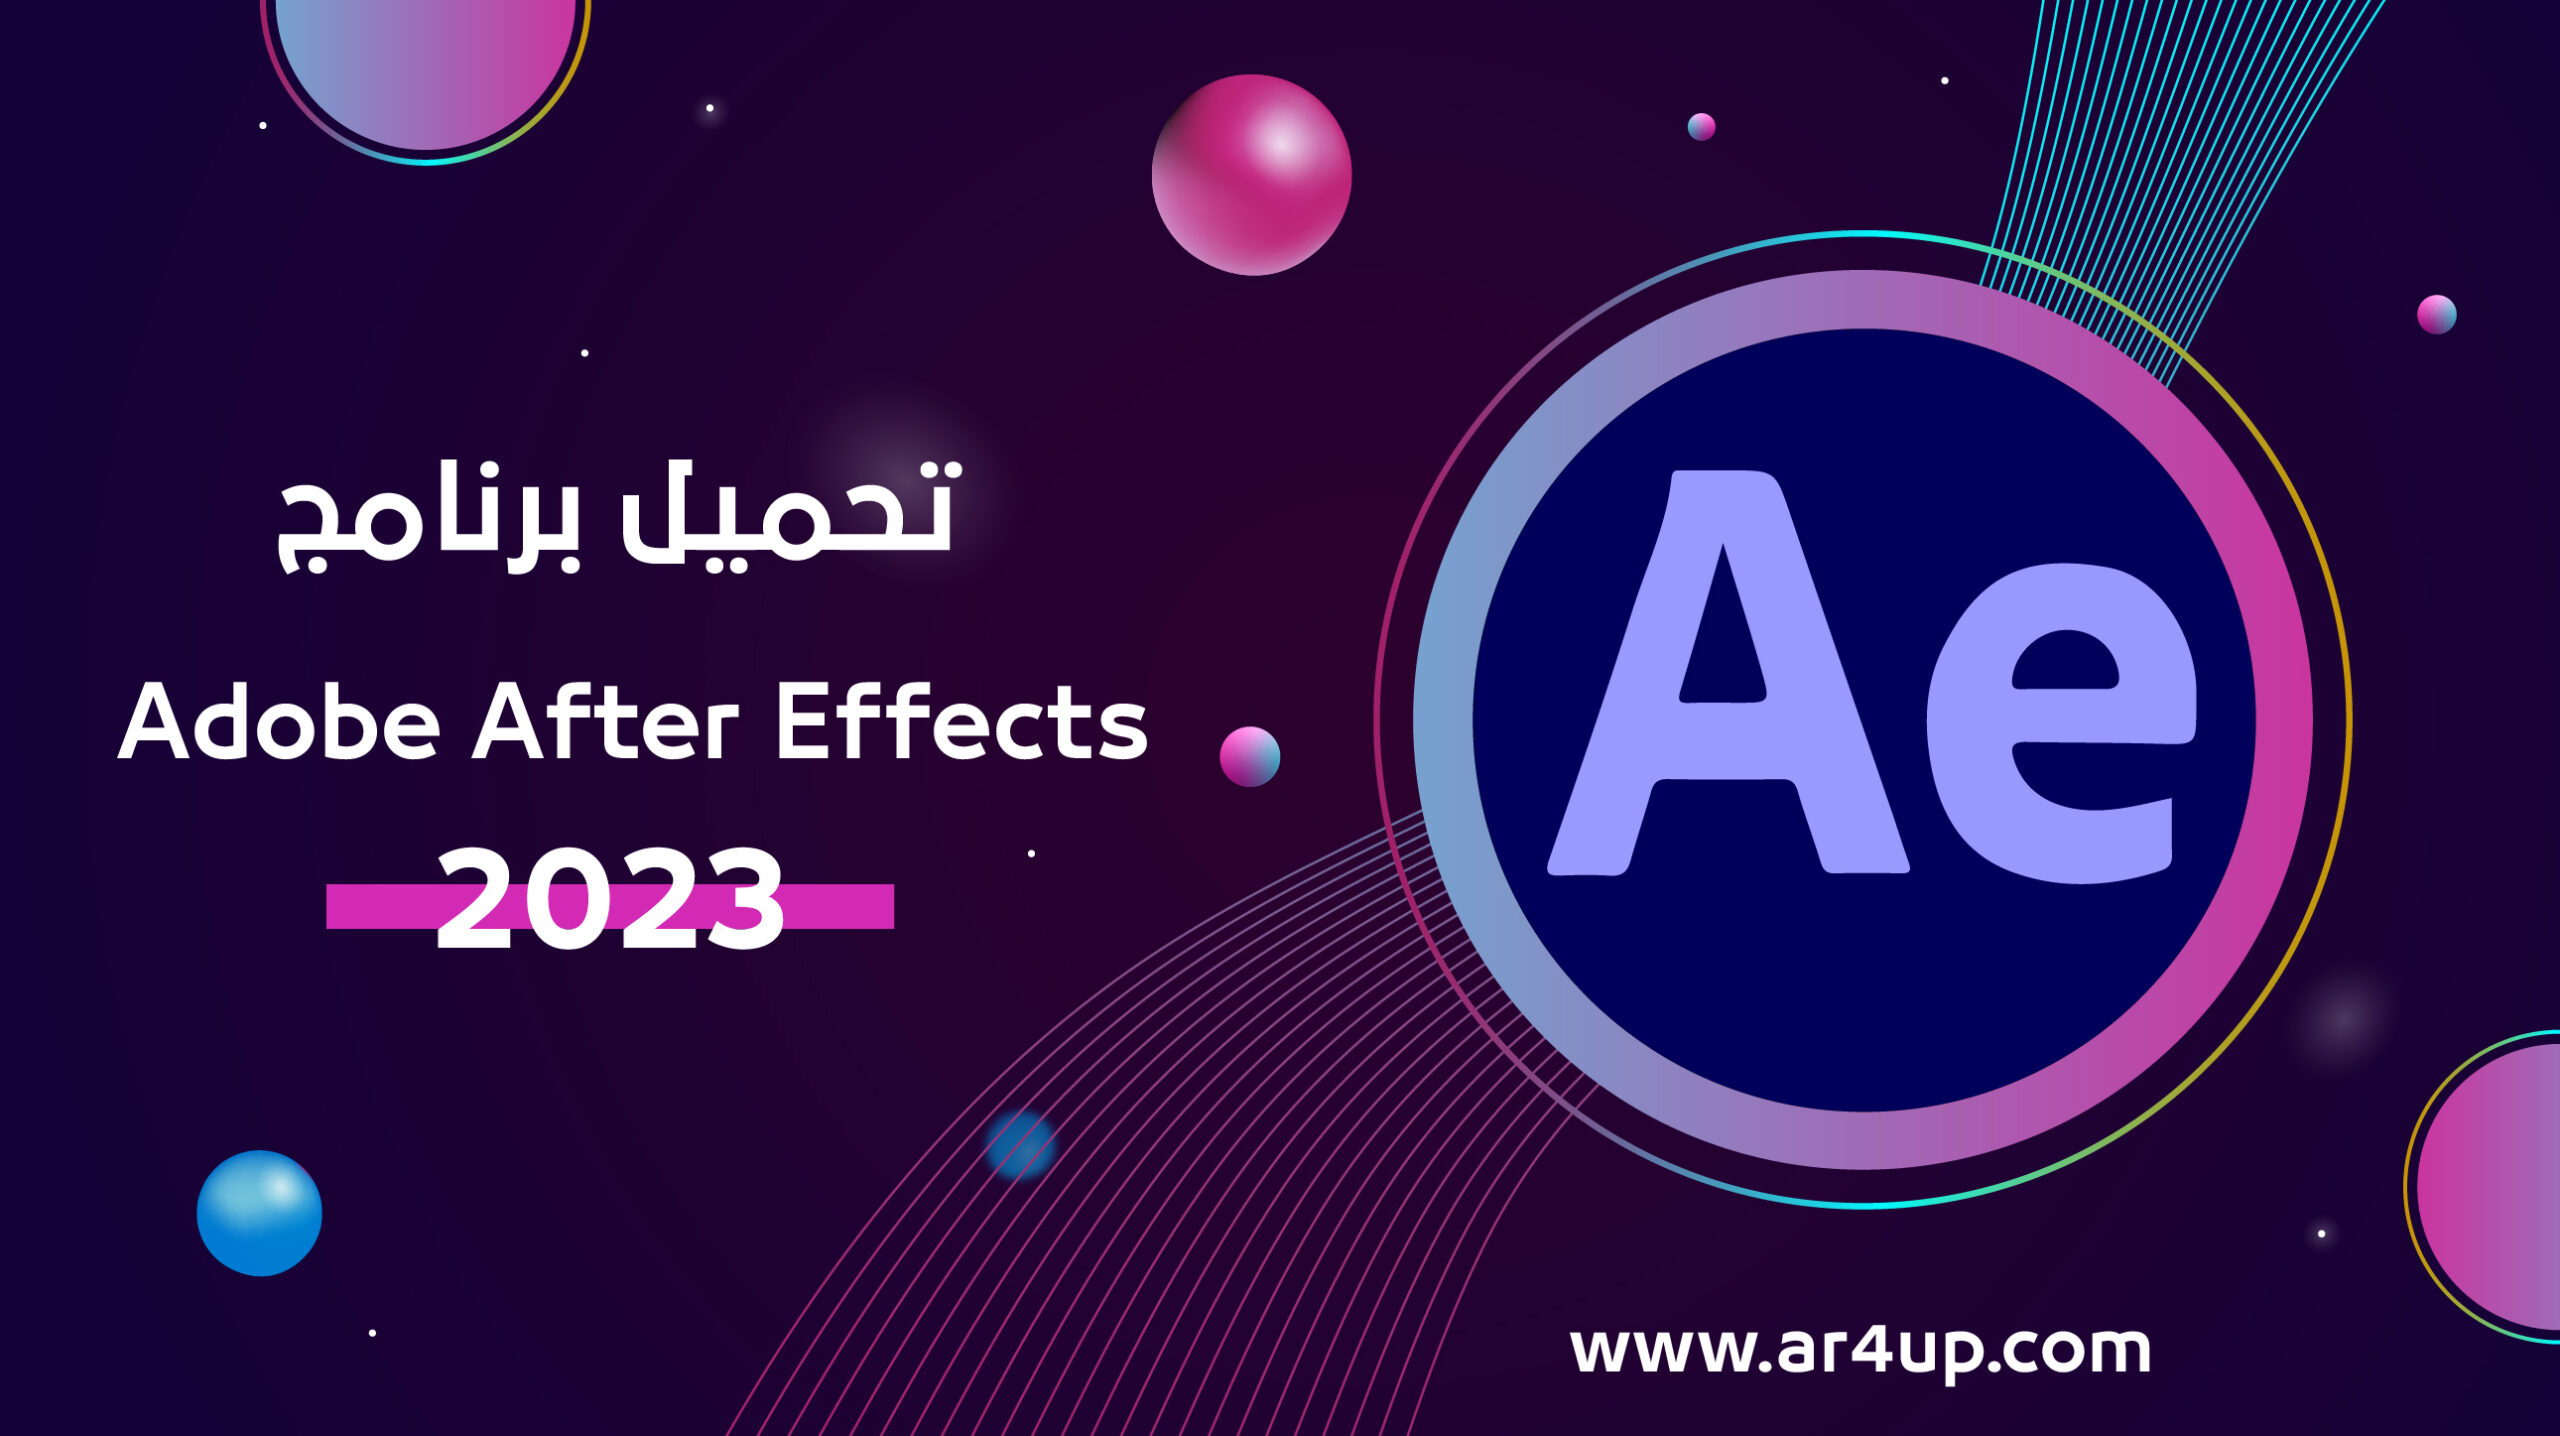 Adobe After Effects 2023 v23.6.0.62 for mac download free